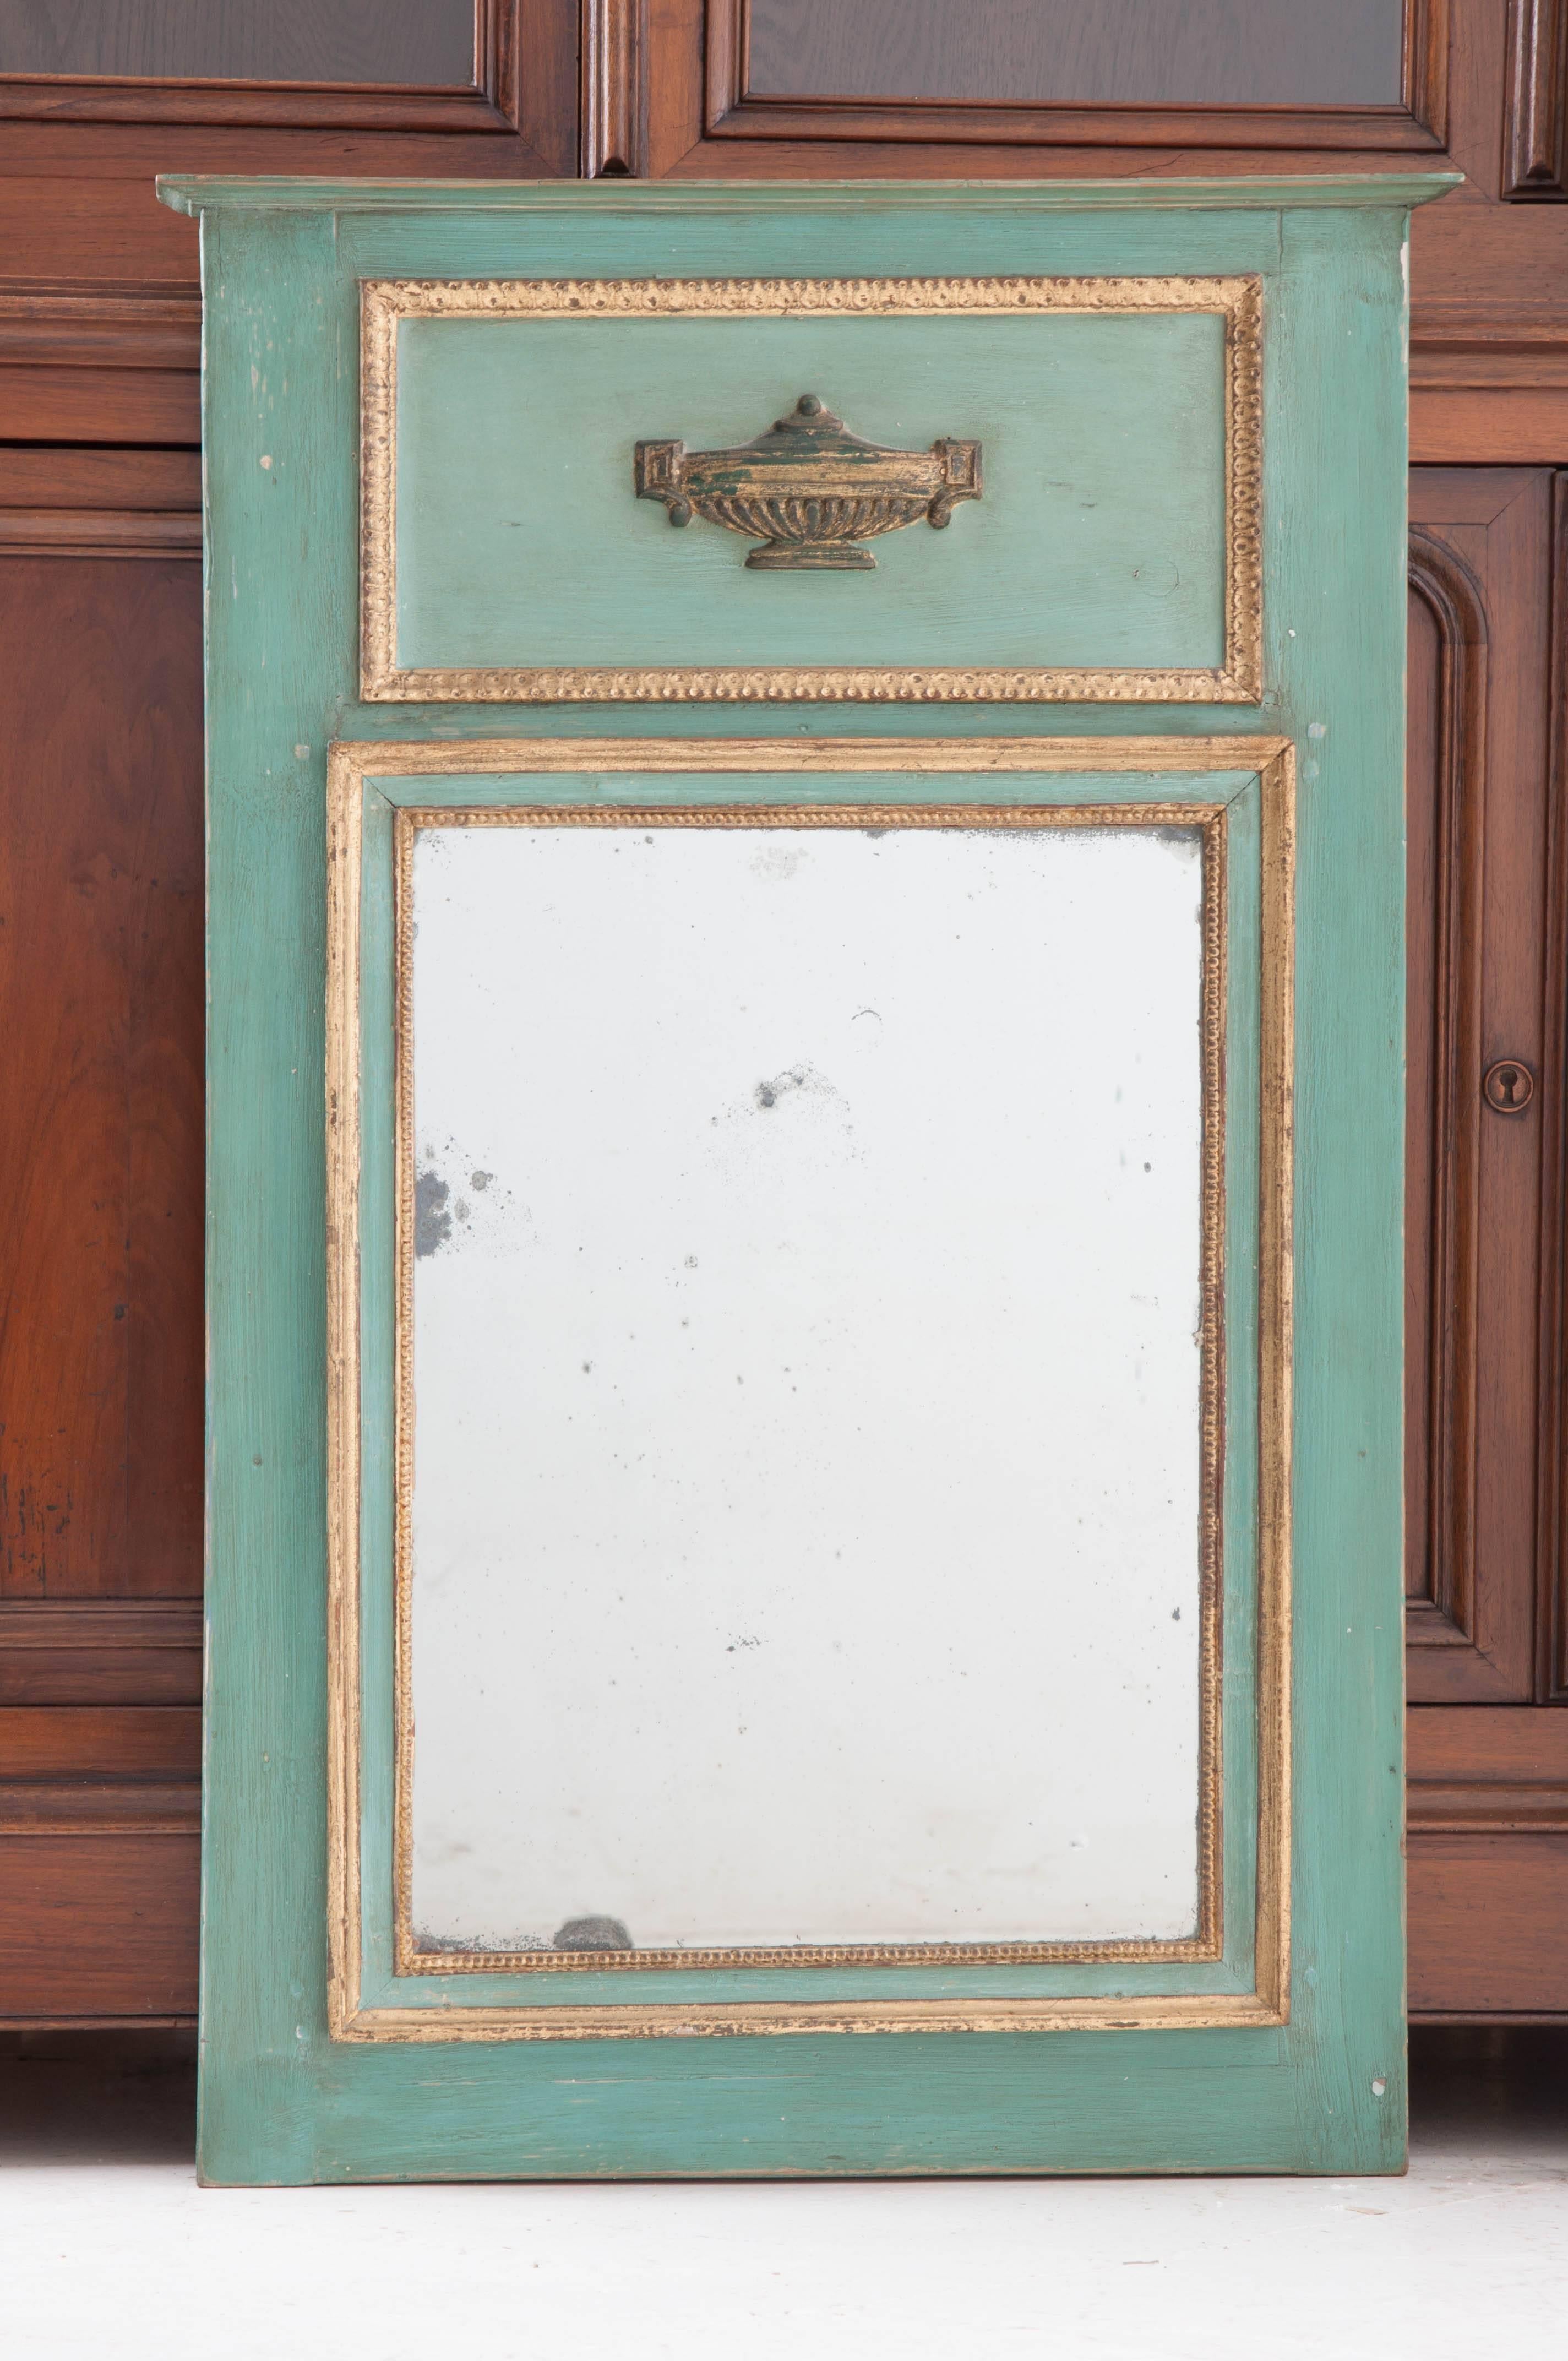 A darling petite trumeau from 19th century, France. Painted turquoise and sporting fine gold gilt trim, this smaller trumeau mirror still holds its original mercury glass which is in exceptional condition. A simple, Classic urn serves as the